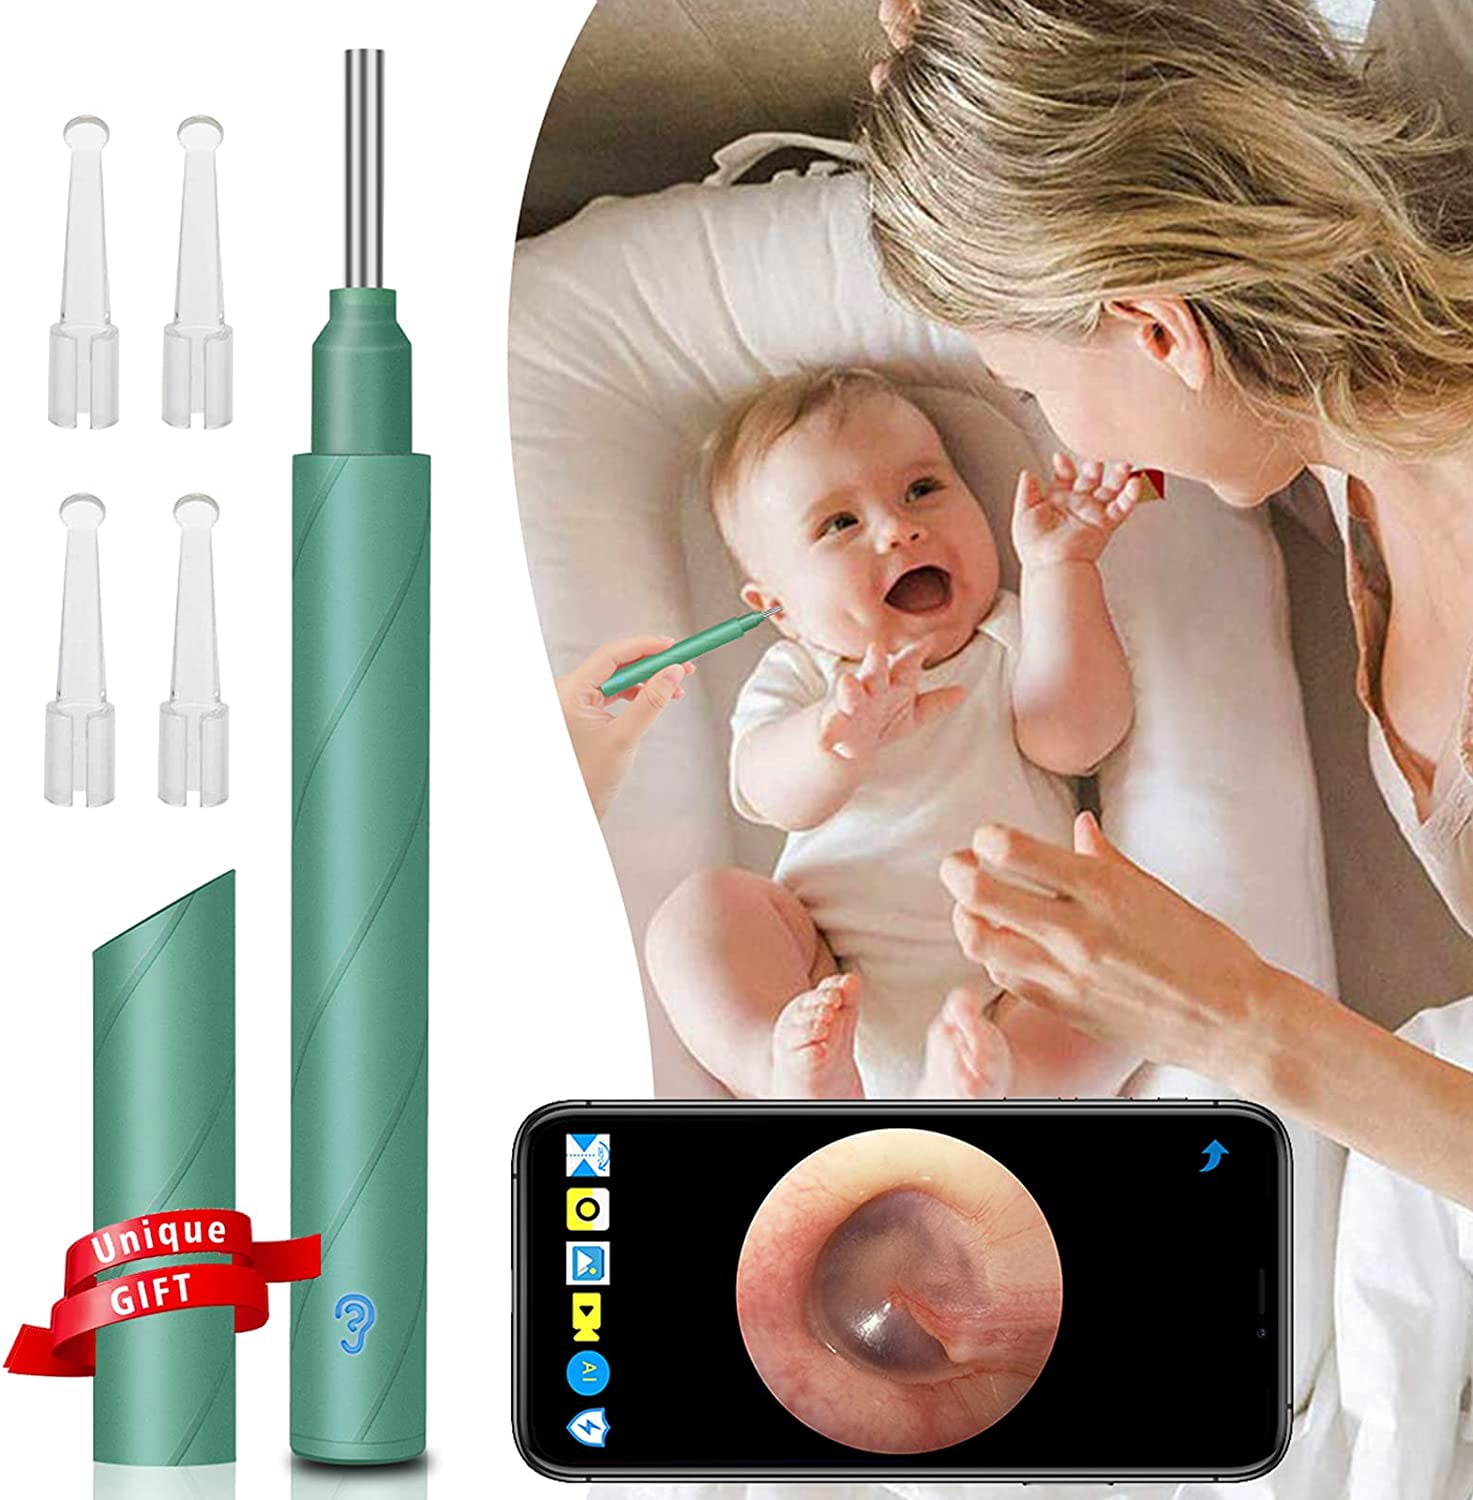 Borescope Inspection Camera Suit for Kids Adults Android and iPhone Digital Ear Camera for Ear Wax Removal 1080p HD Wireless Ear Otoscope Cleaner